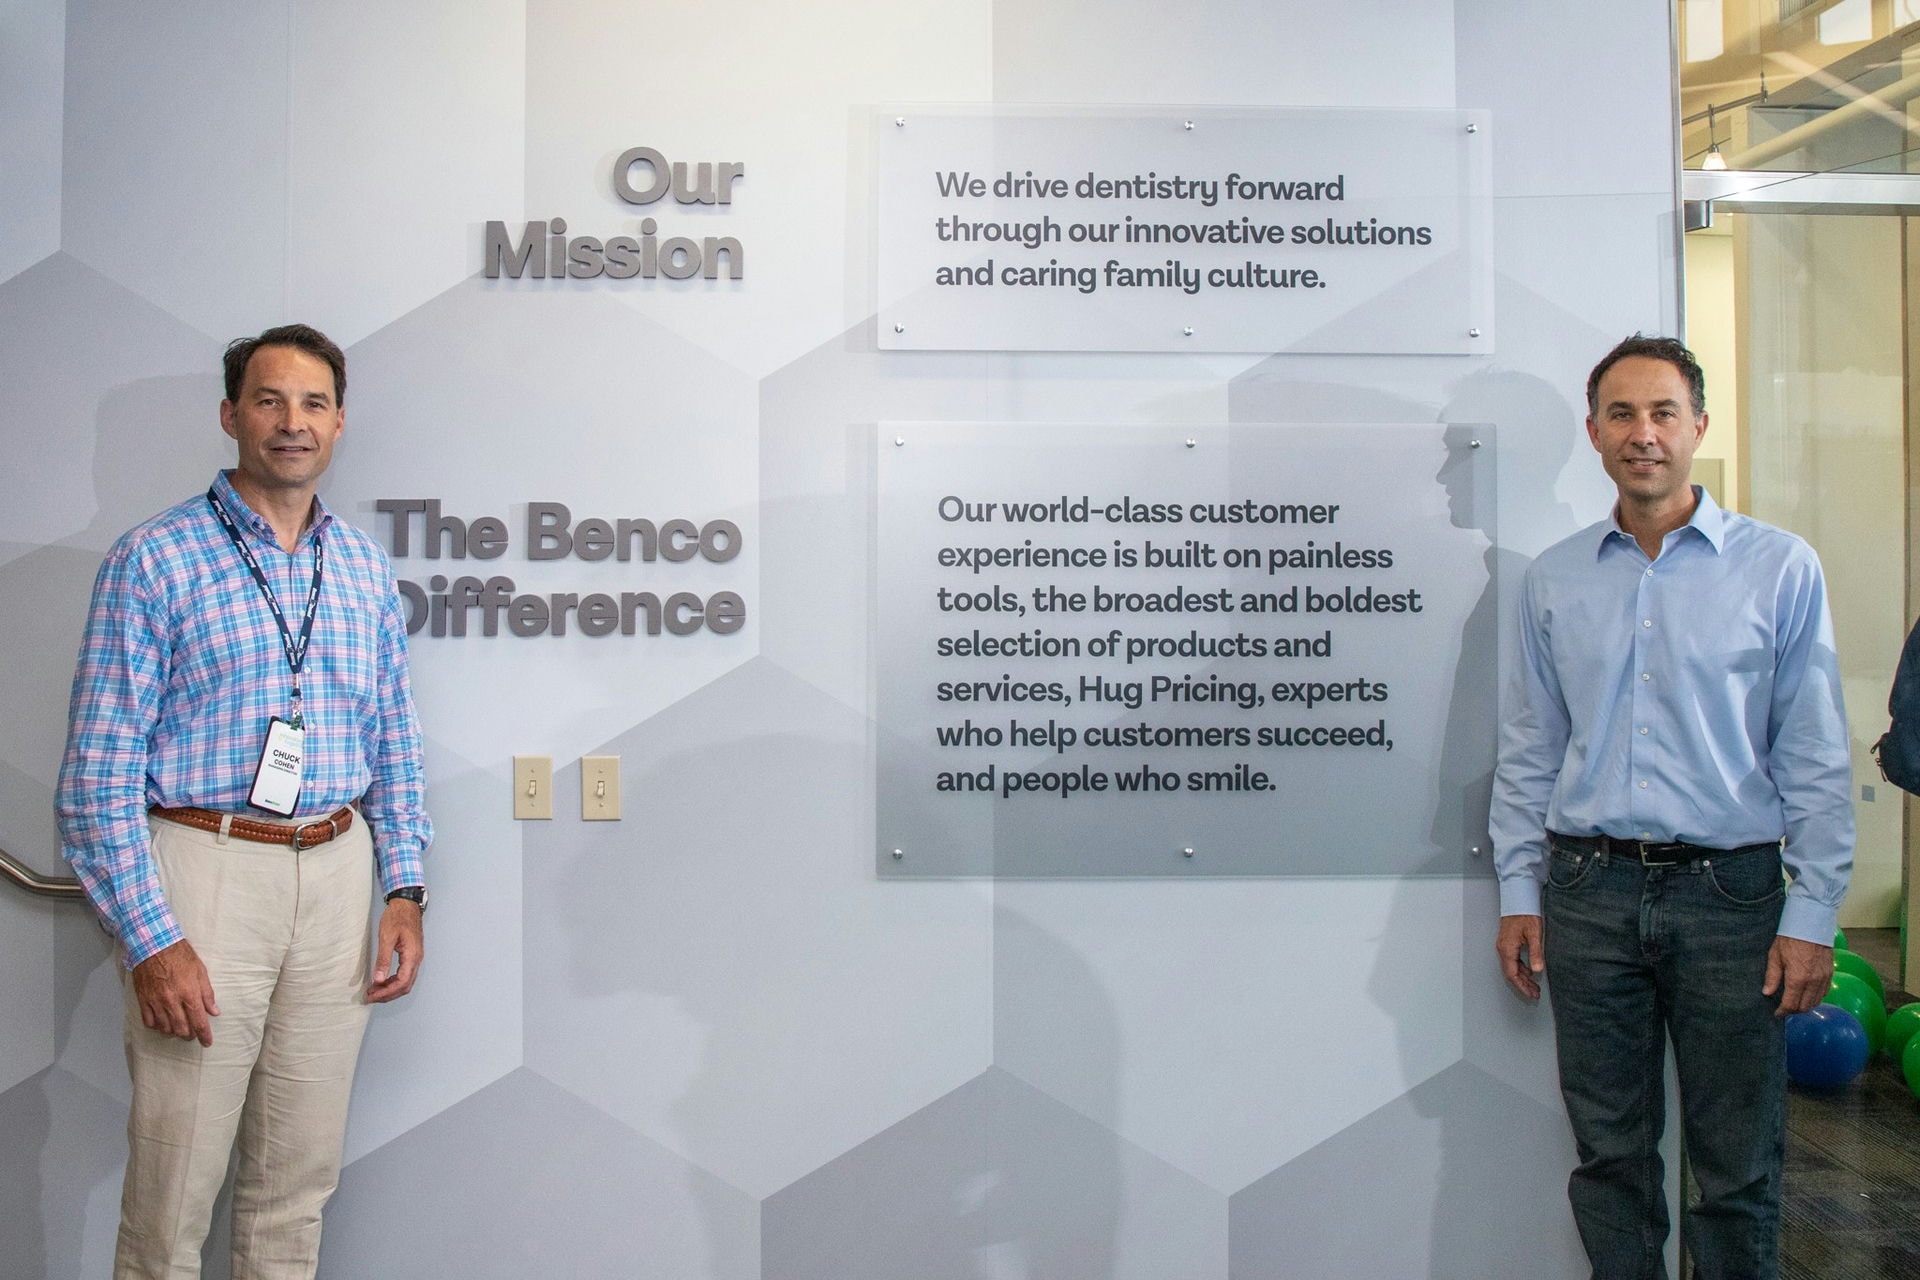 Managing Directors Chuck and Rick Cohen with the new mission statement in the lobby of CenterPoint East home office.